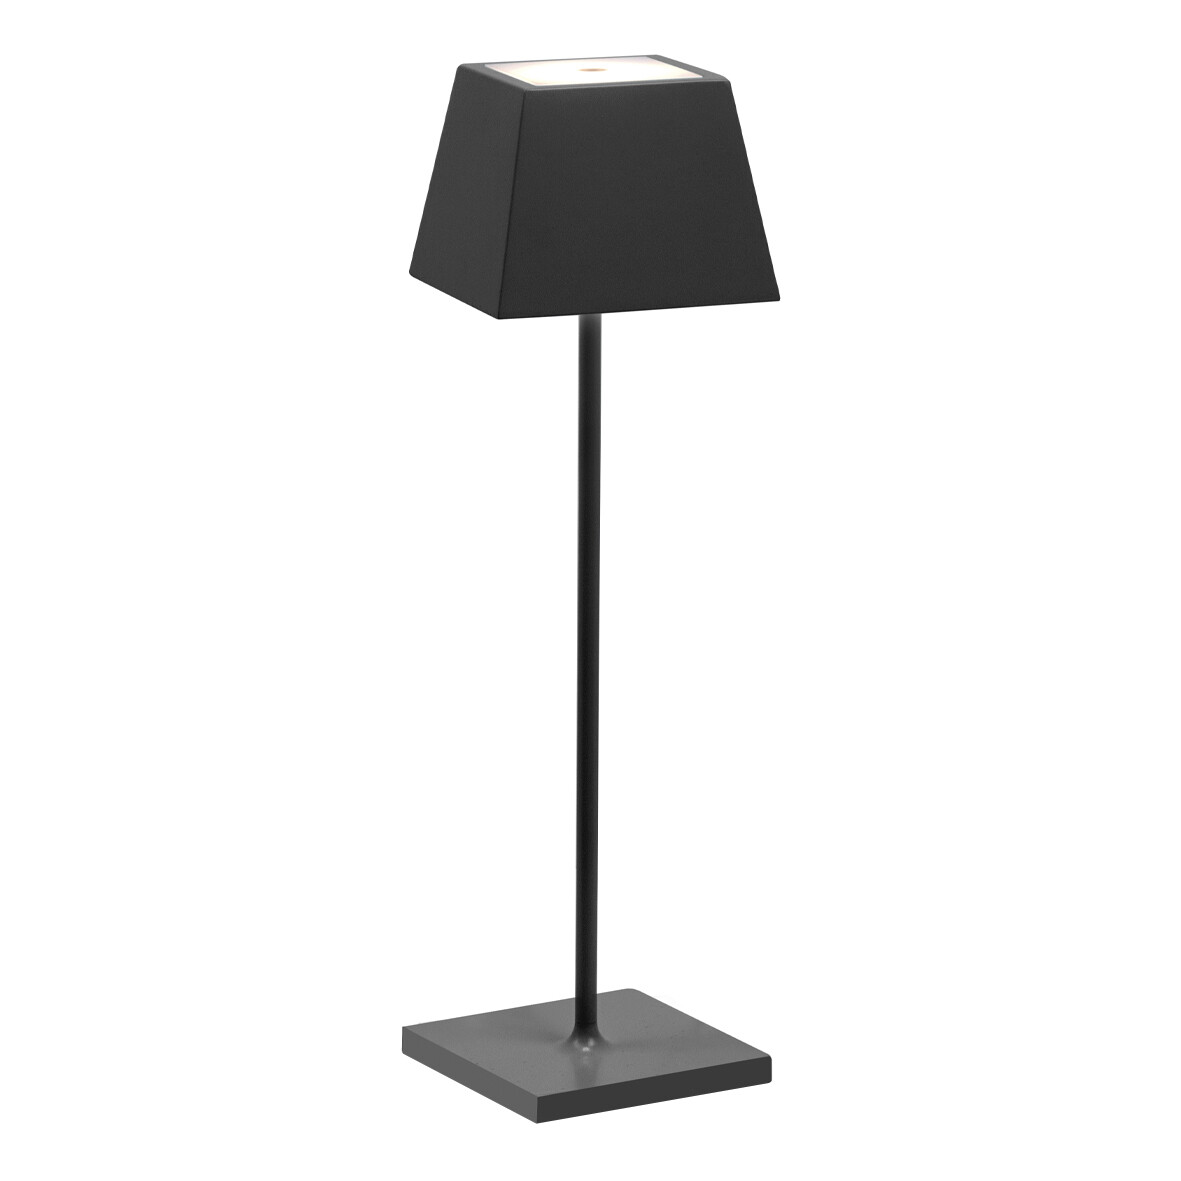 SIESTA LED table lamp grey (2700K), portable and rechargeable